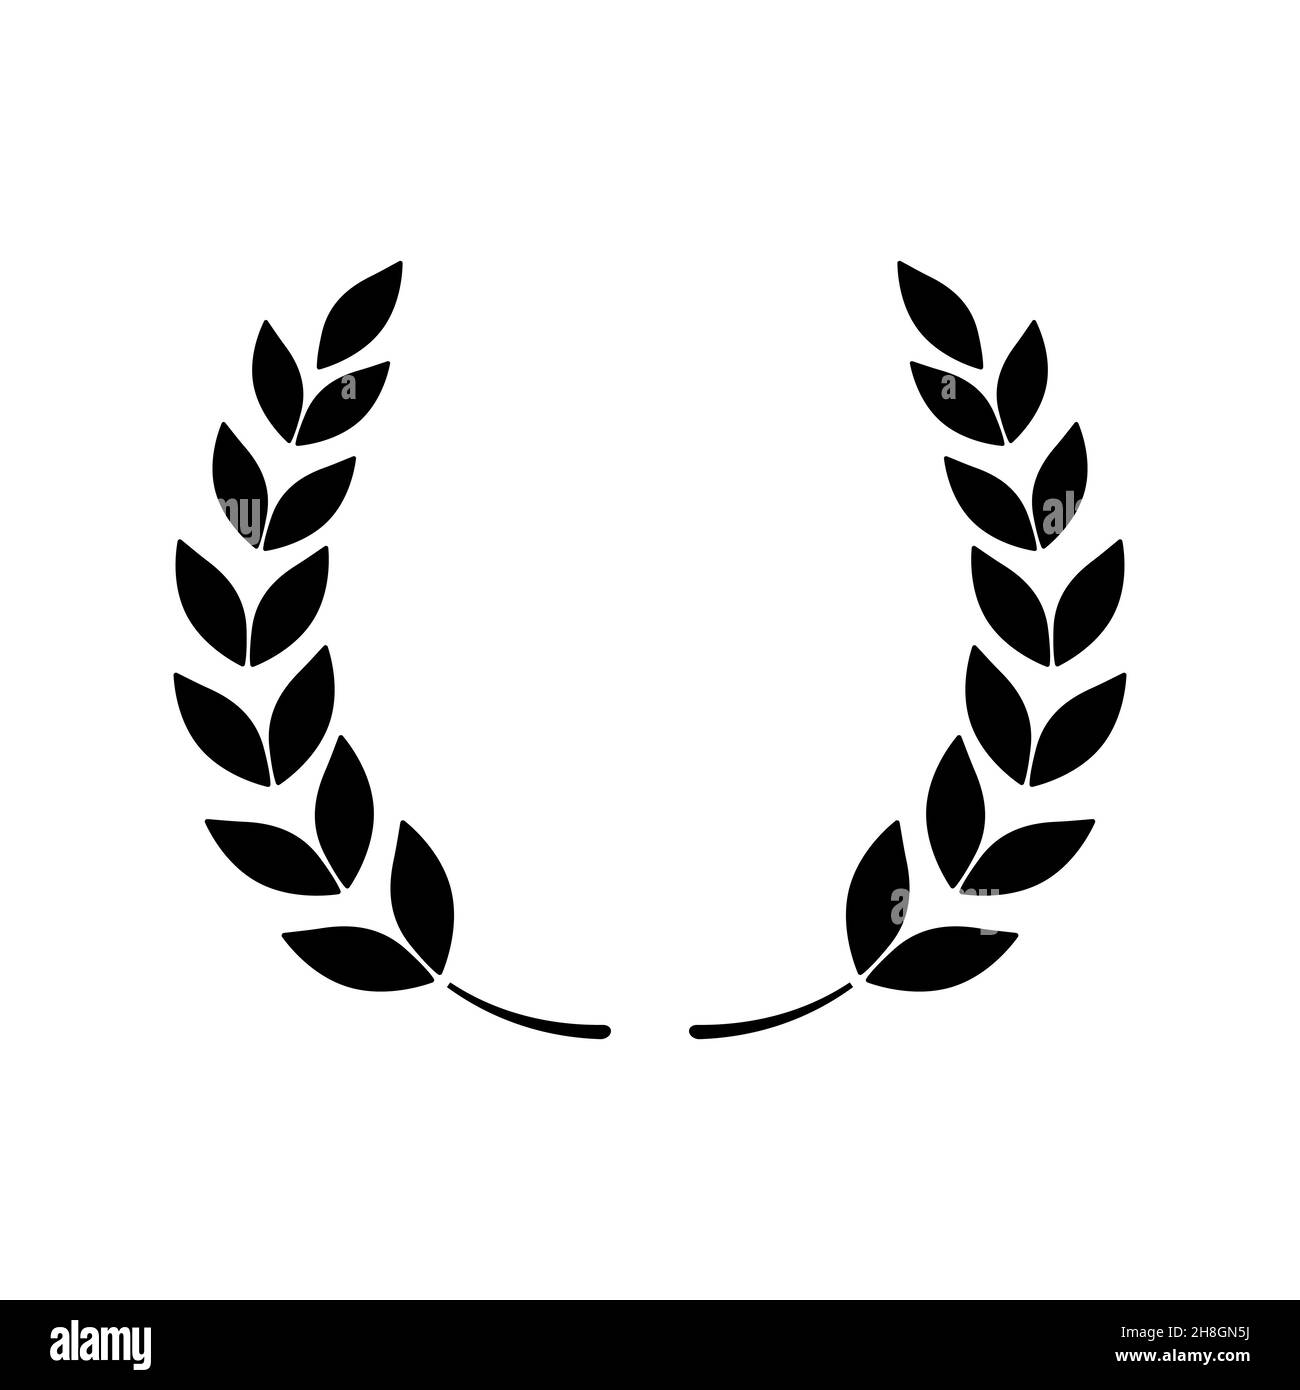 Laurel wreath - symbol of victory and power flat vector icon for apps and websites Stock Vector